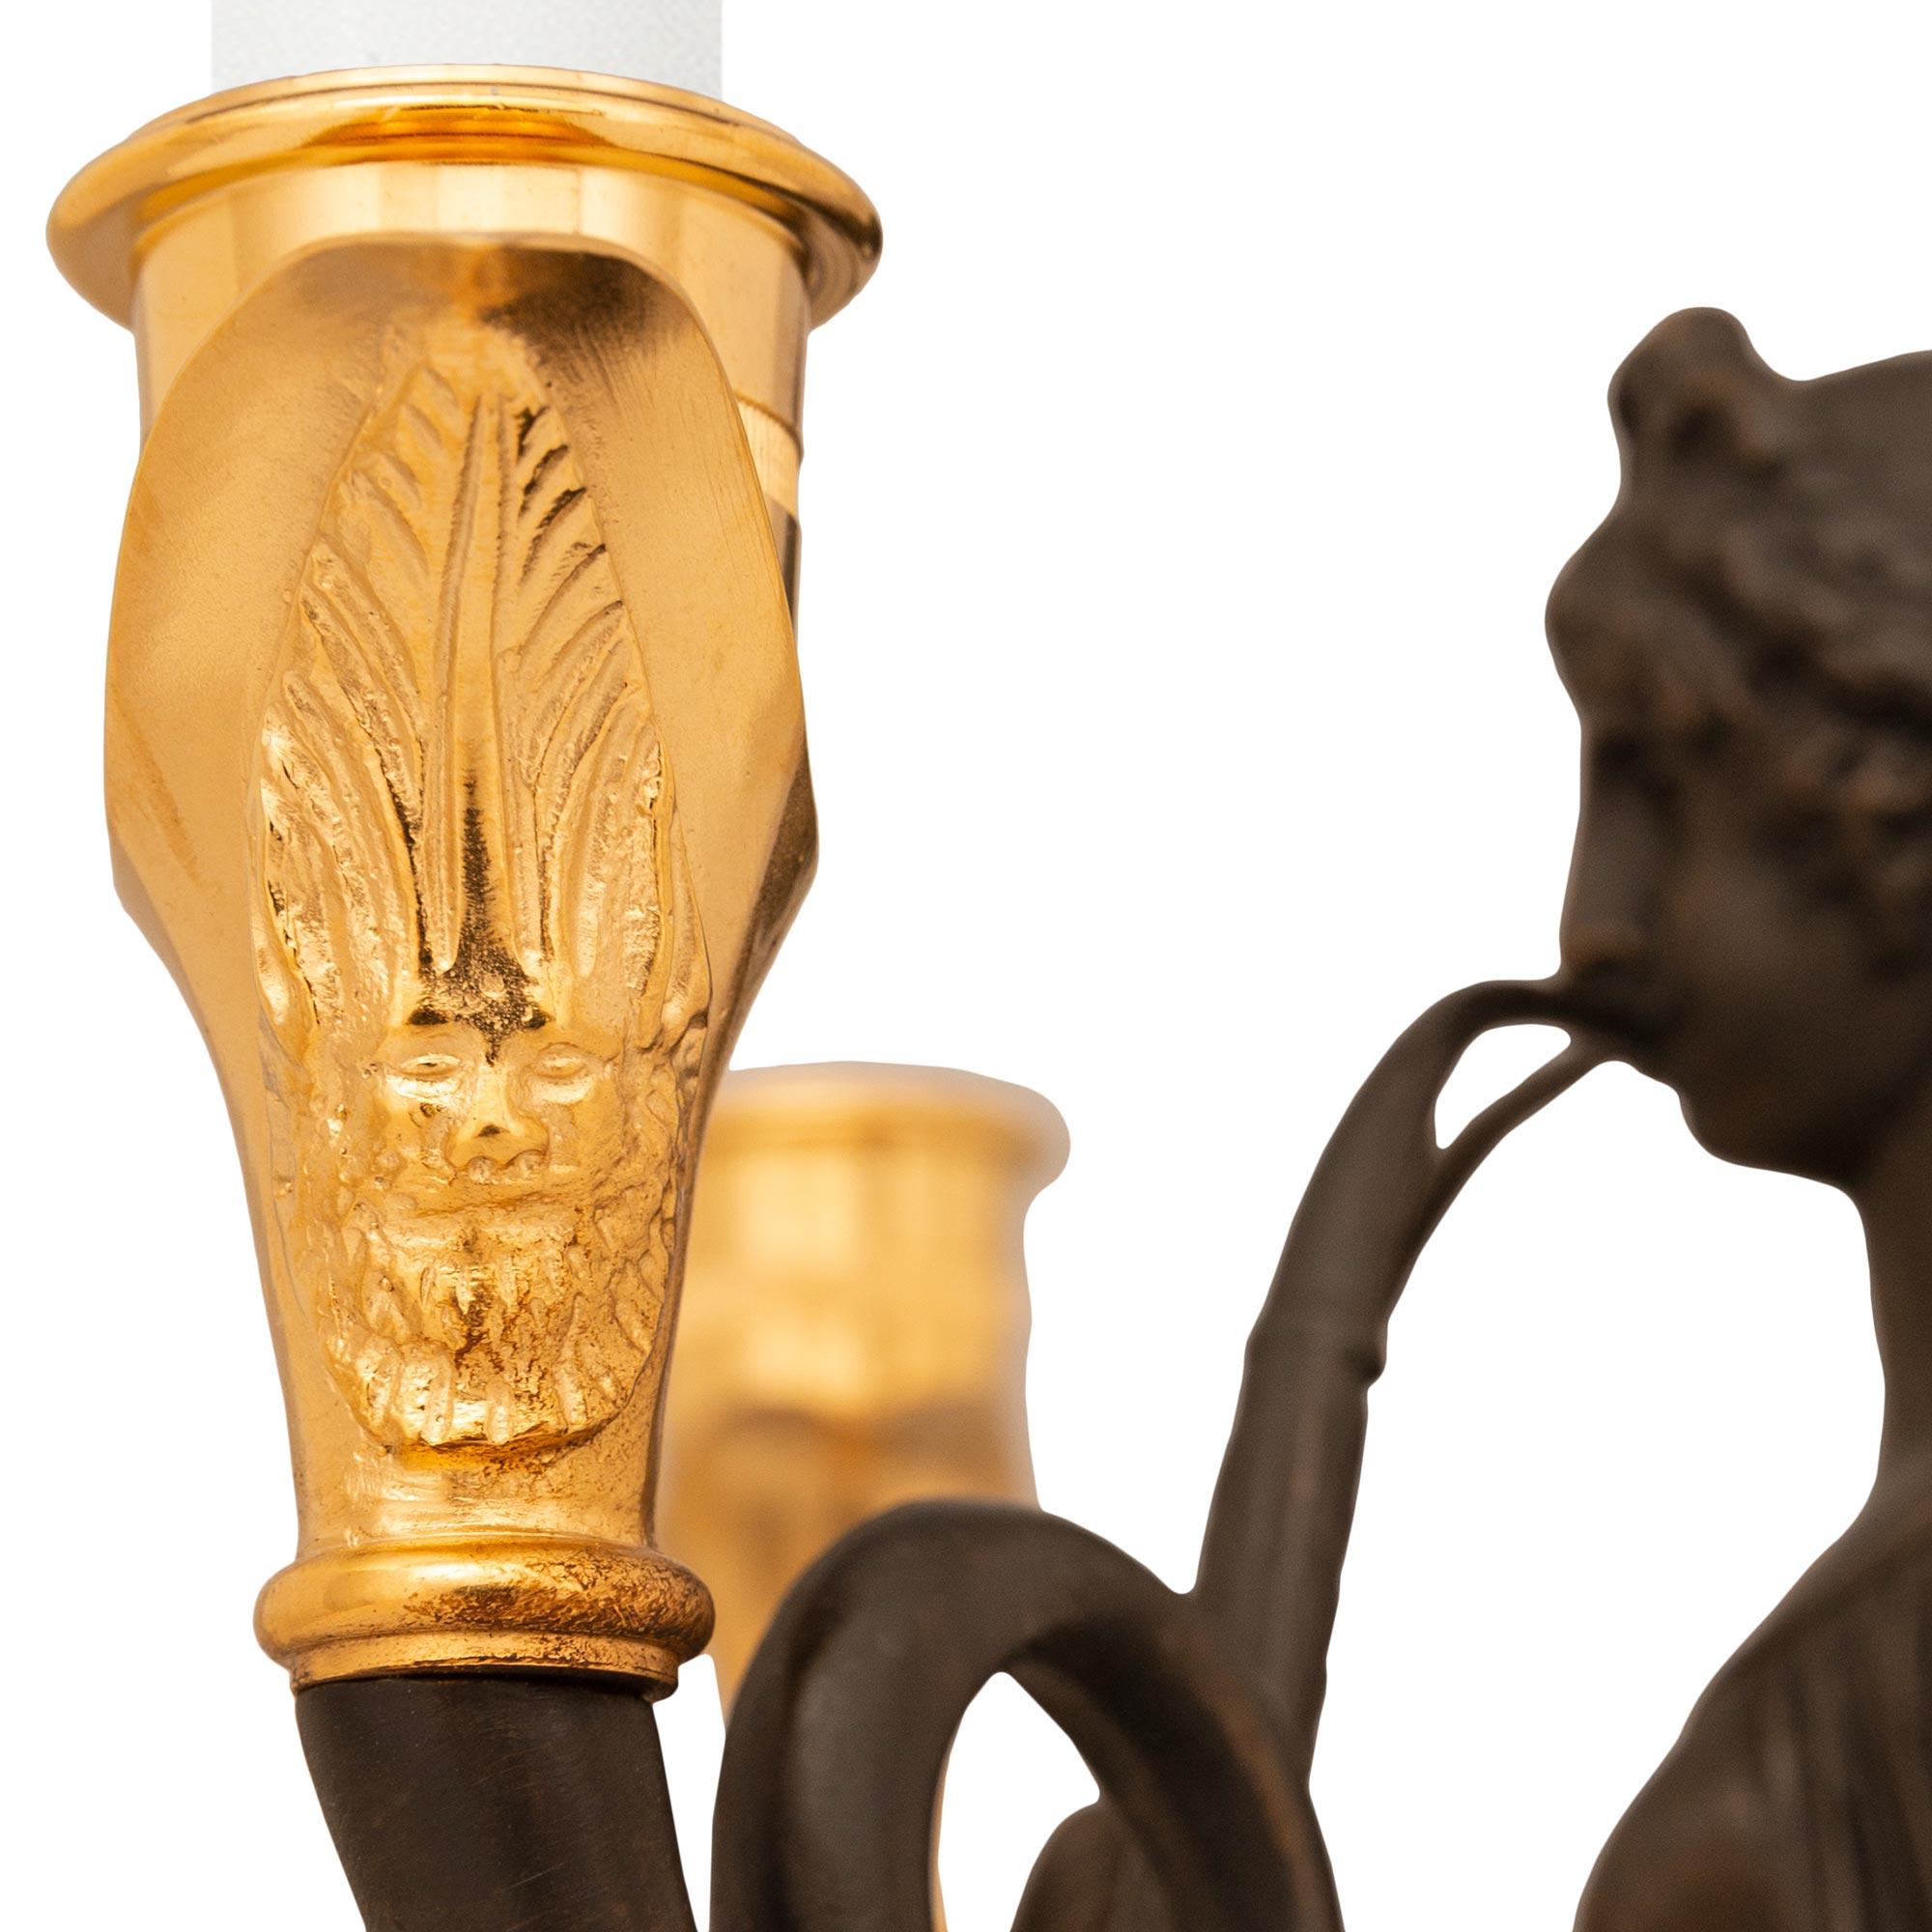 Pair Of French 19th Century Neoclassical St. Bronze, Ormolu & Marble Candelabras For Sale 2